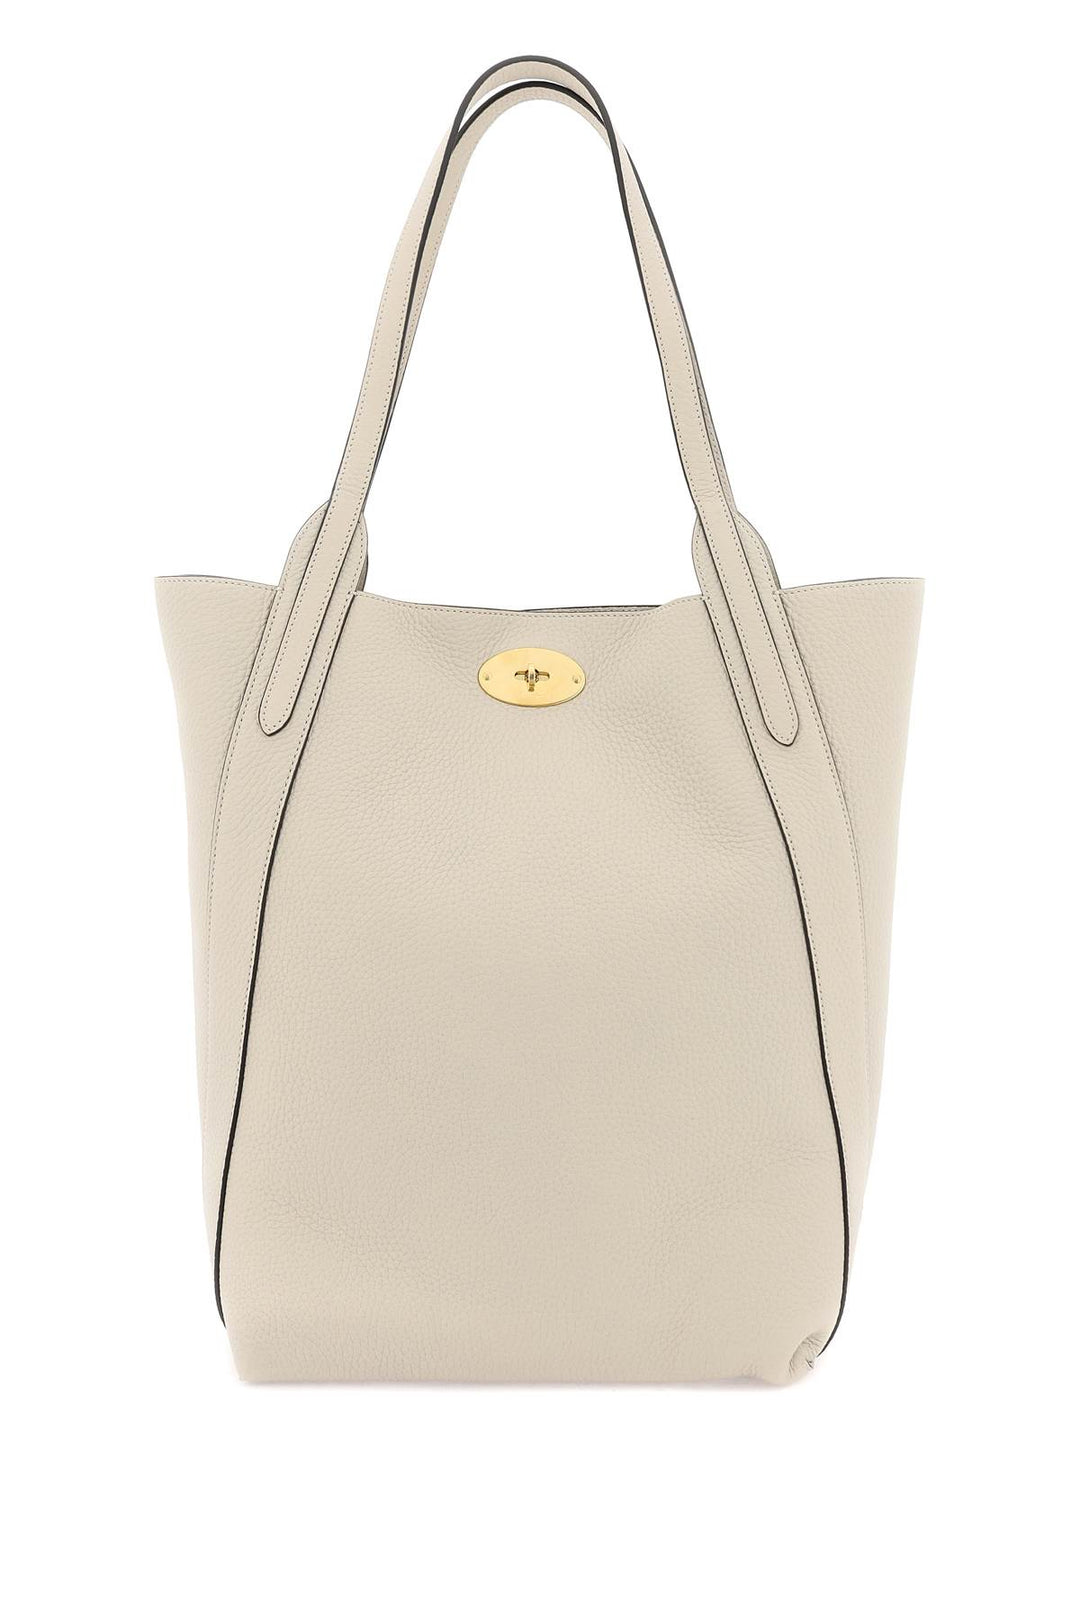 Mulberry Grained Leather Bayswater Tote Bag   Neutro